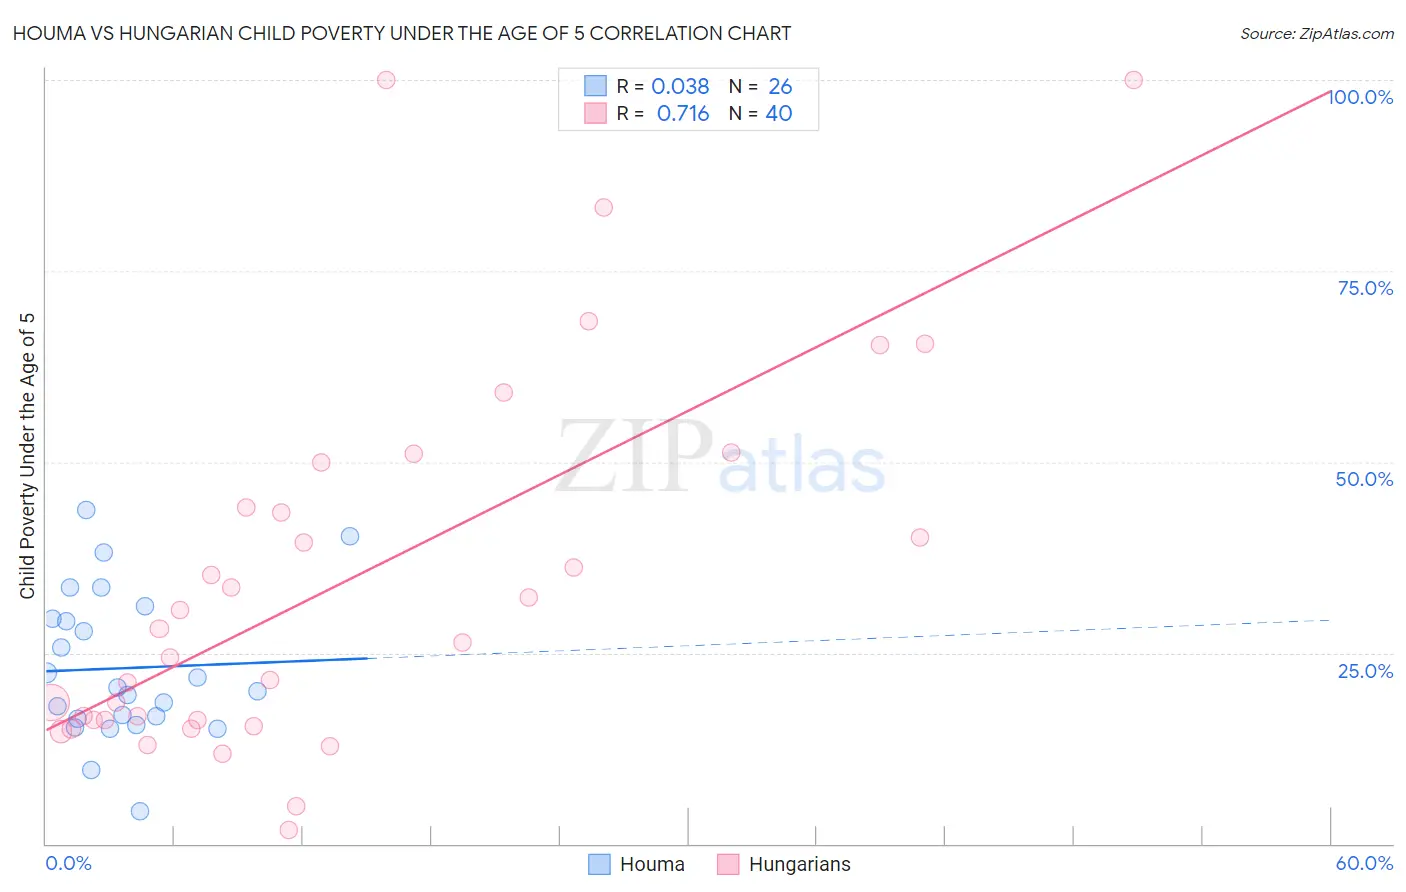 Houma vs Hungarian Child Poverty Under the Age of 5